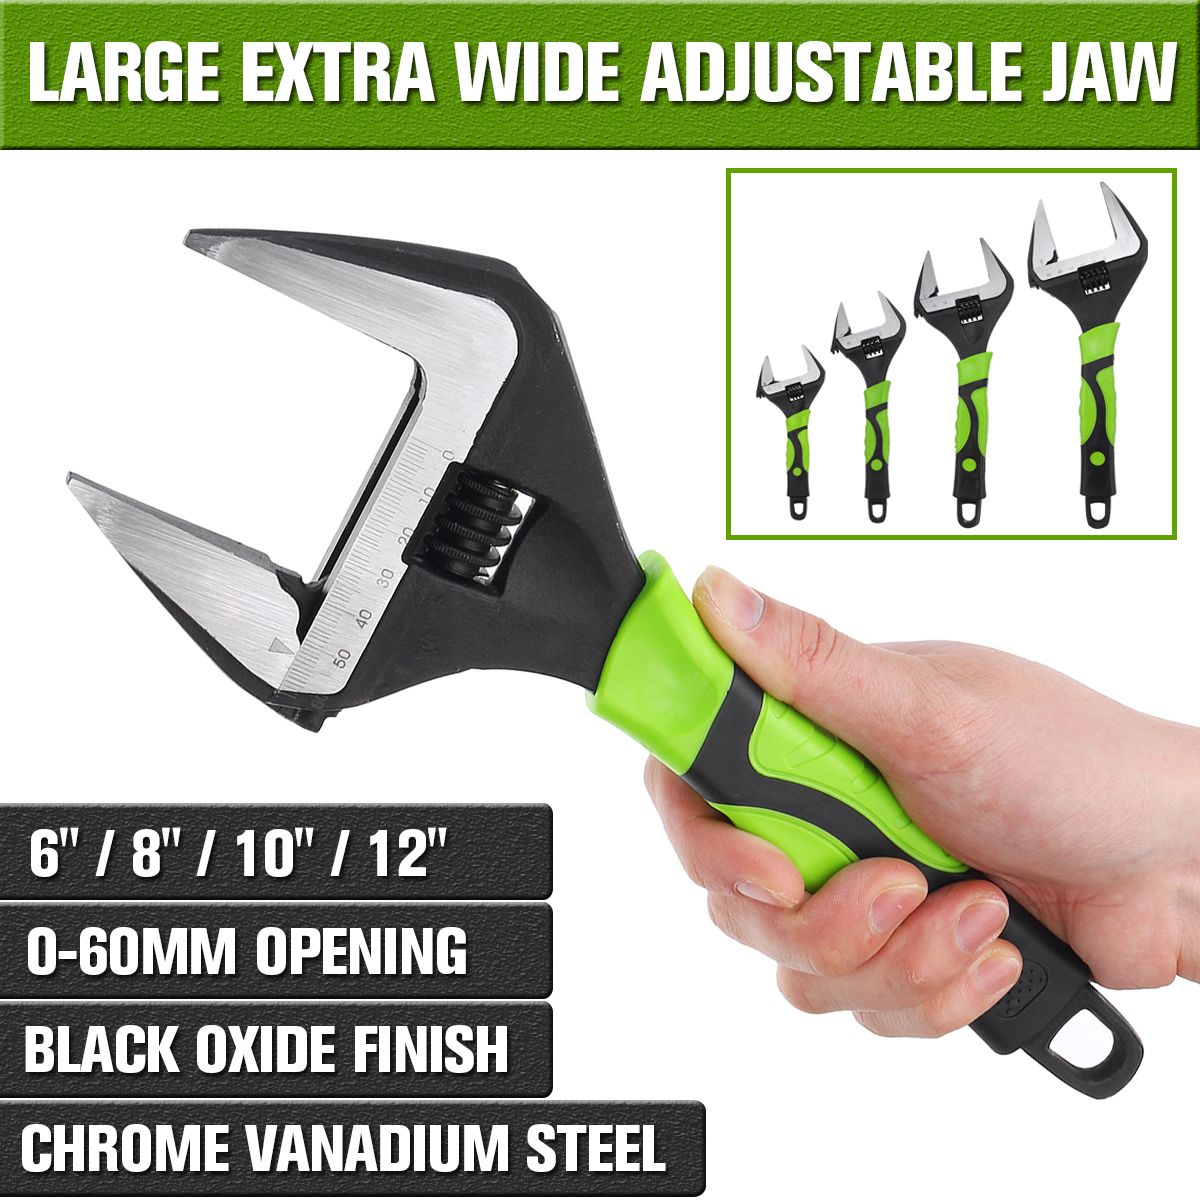 612inch-60mm-Large-Extra-Wide-Jaw-Adjustable-Spanner-Wrench-Capacity-Nut-Pipe-Tool-1631681